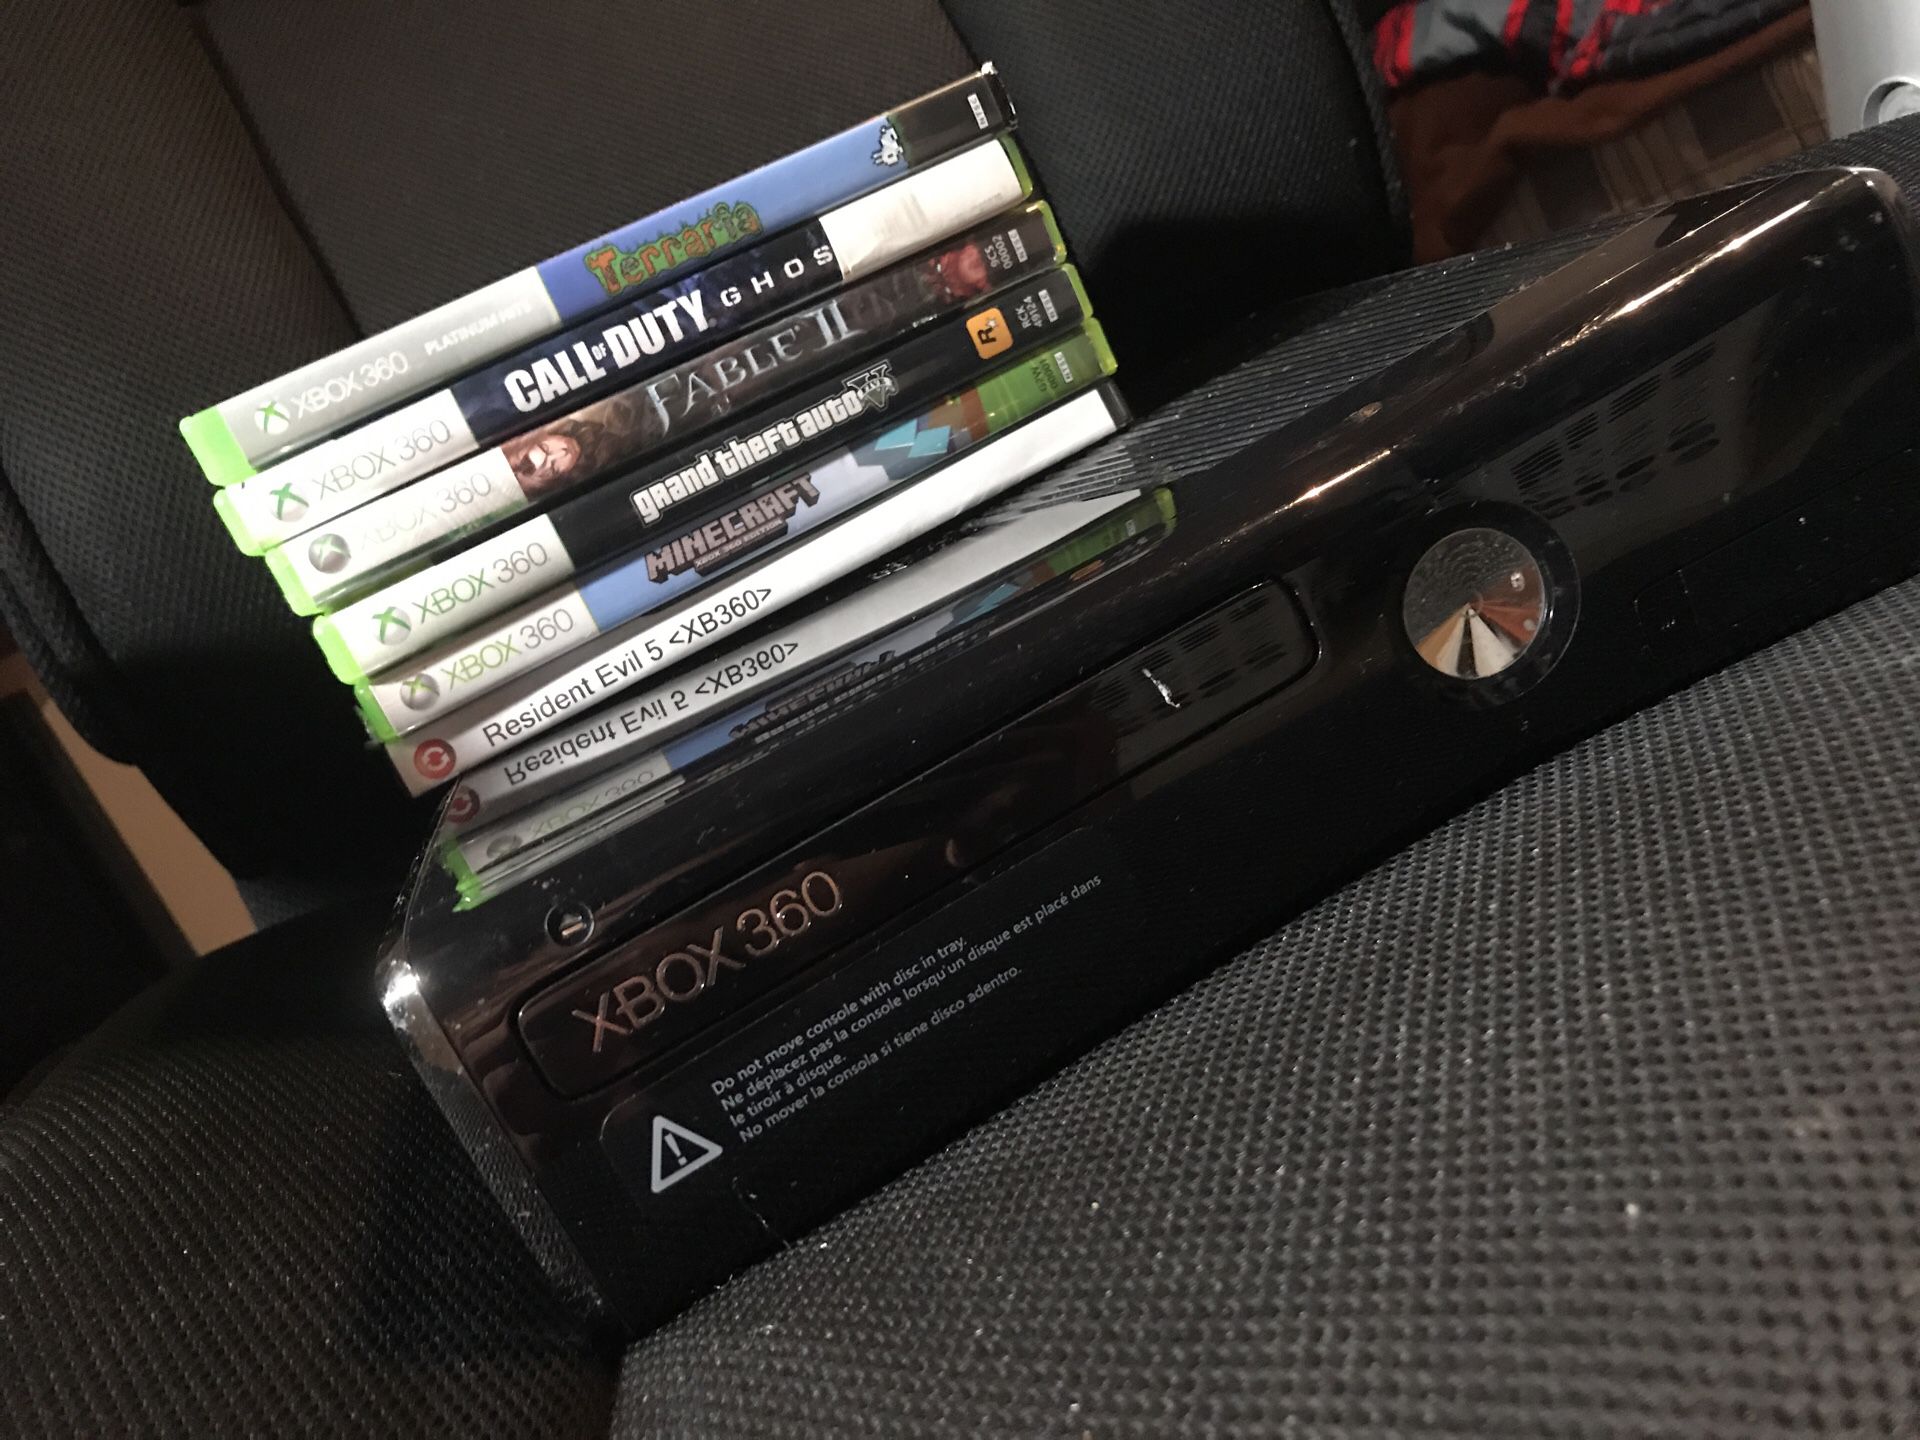 Black xbox 360 with 6 games and turtle beach headset